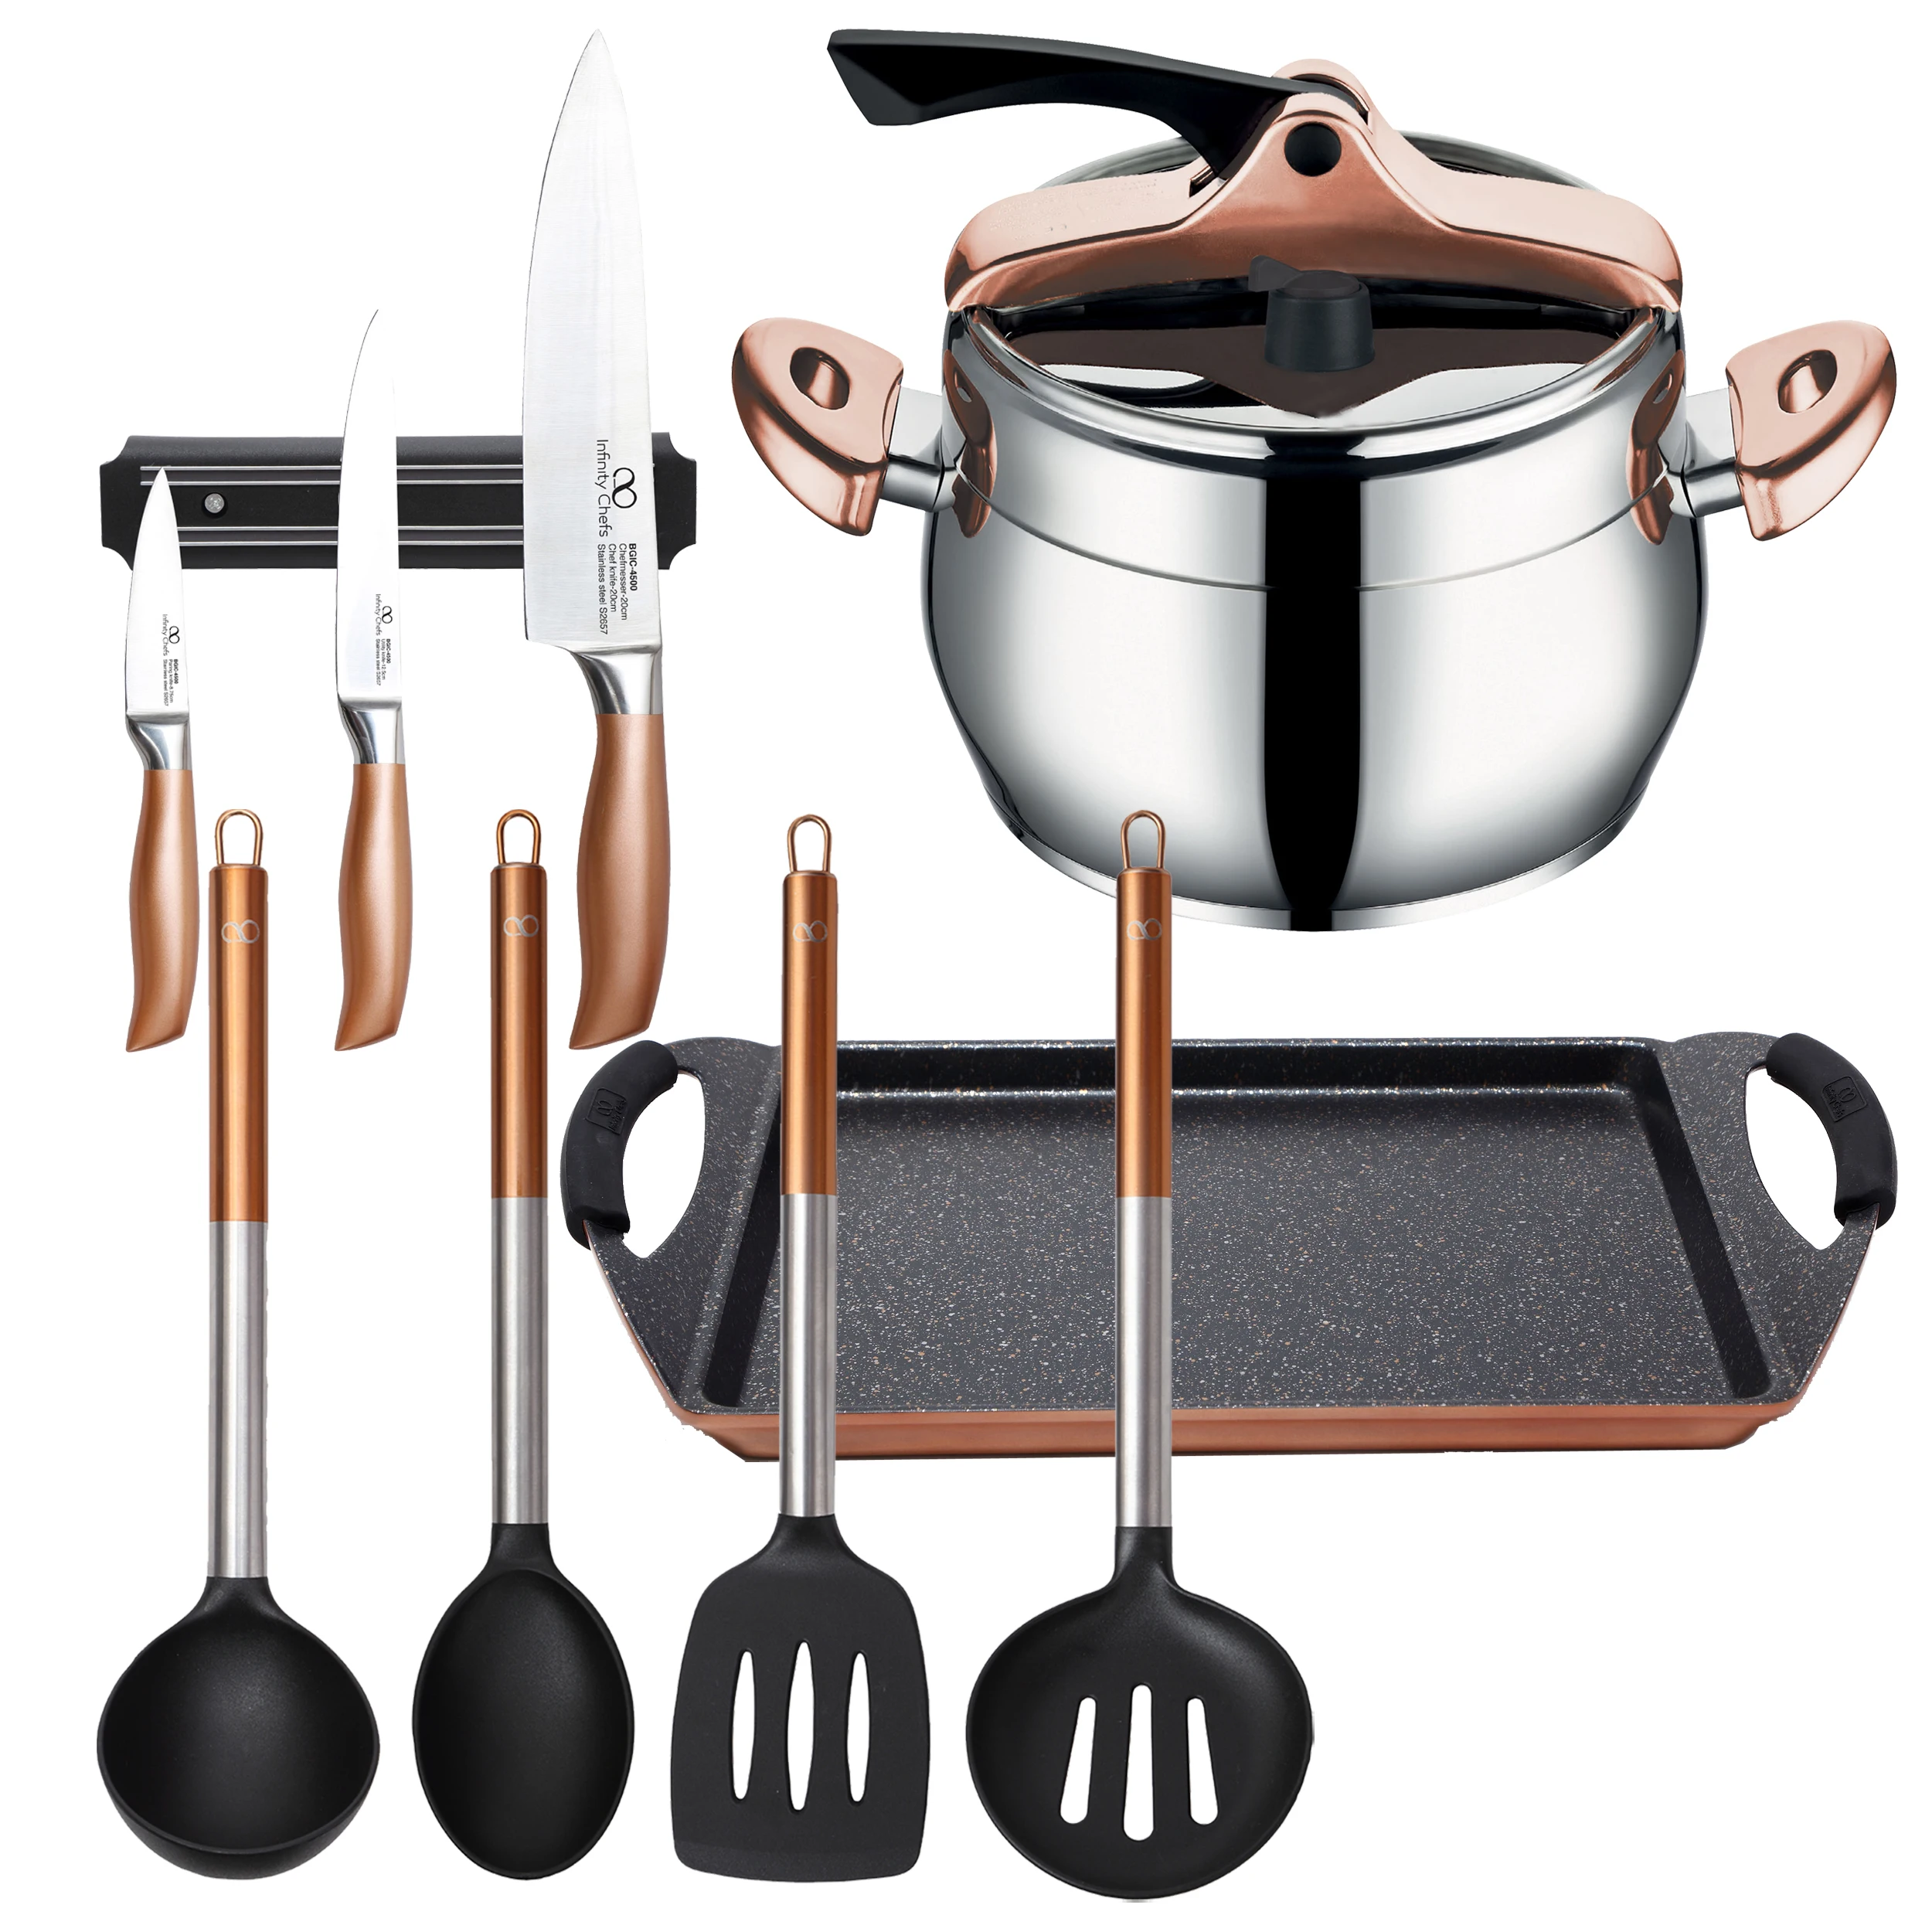 Classic Collection stainless steel BERGNER pots and pans - AliExpress